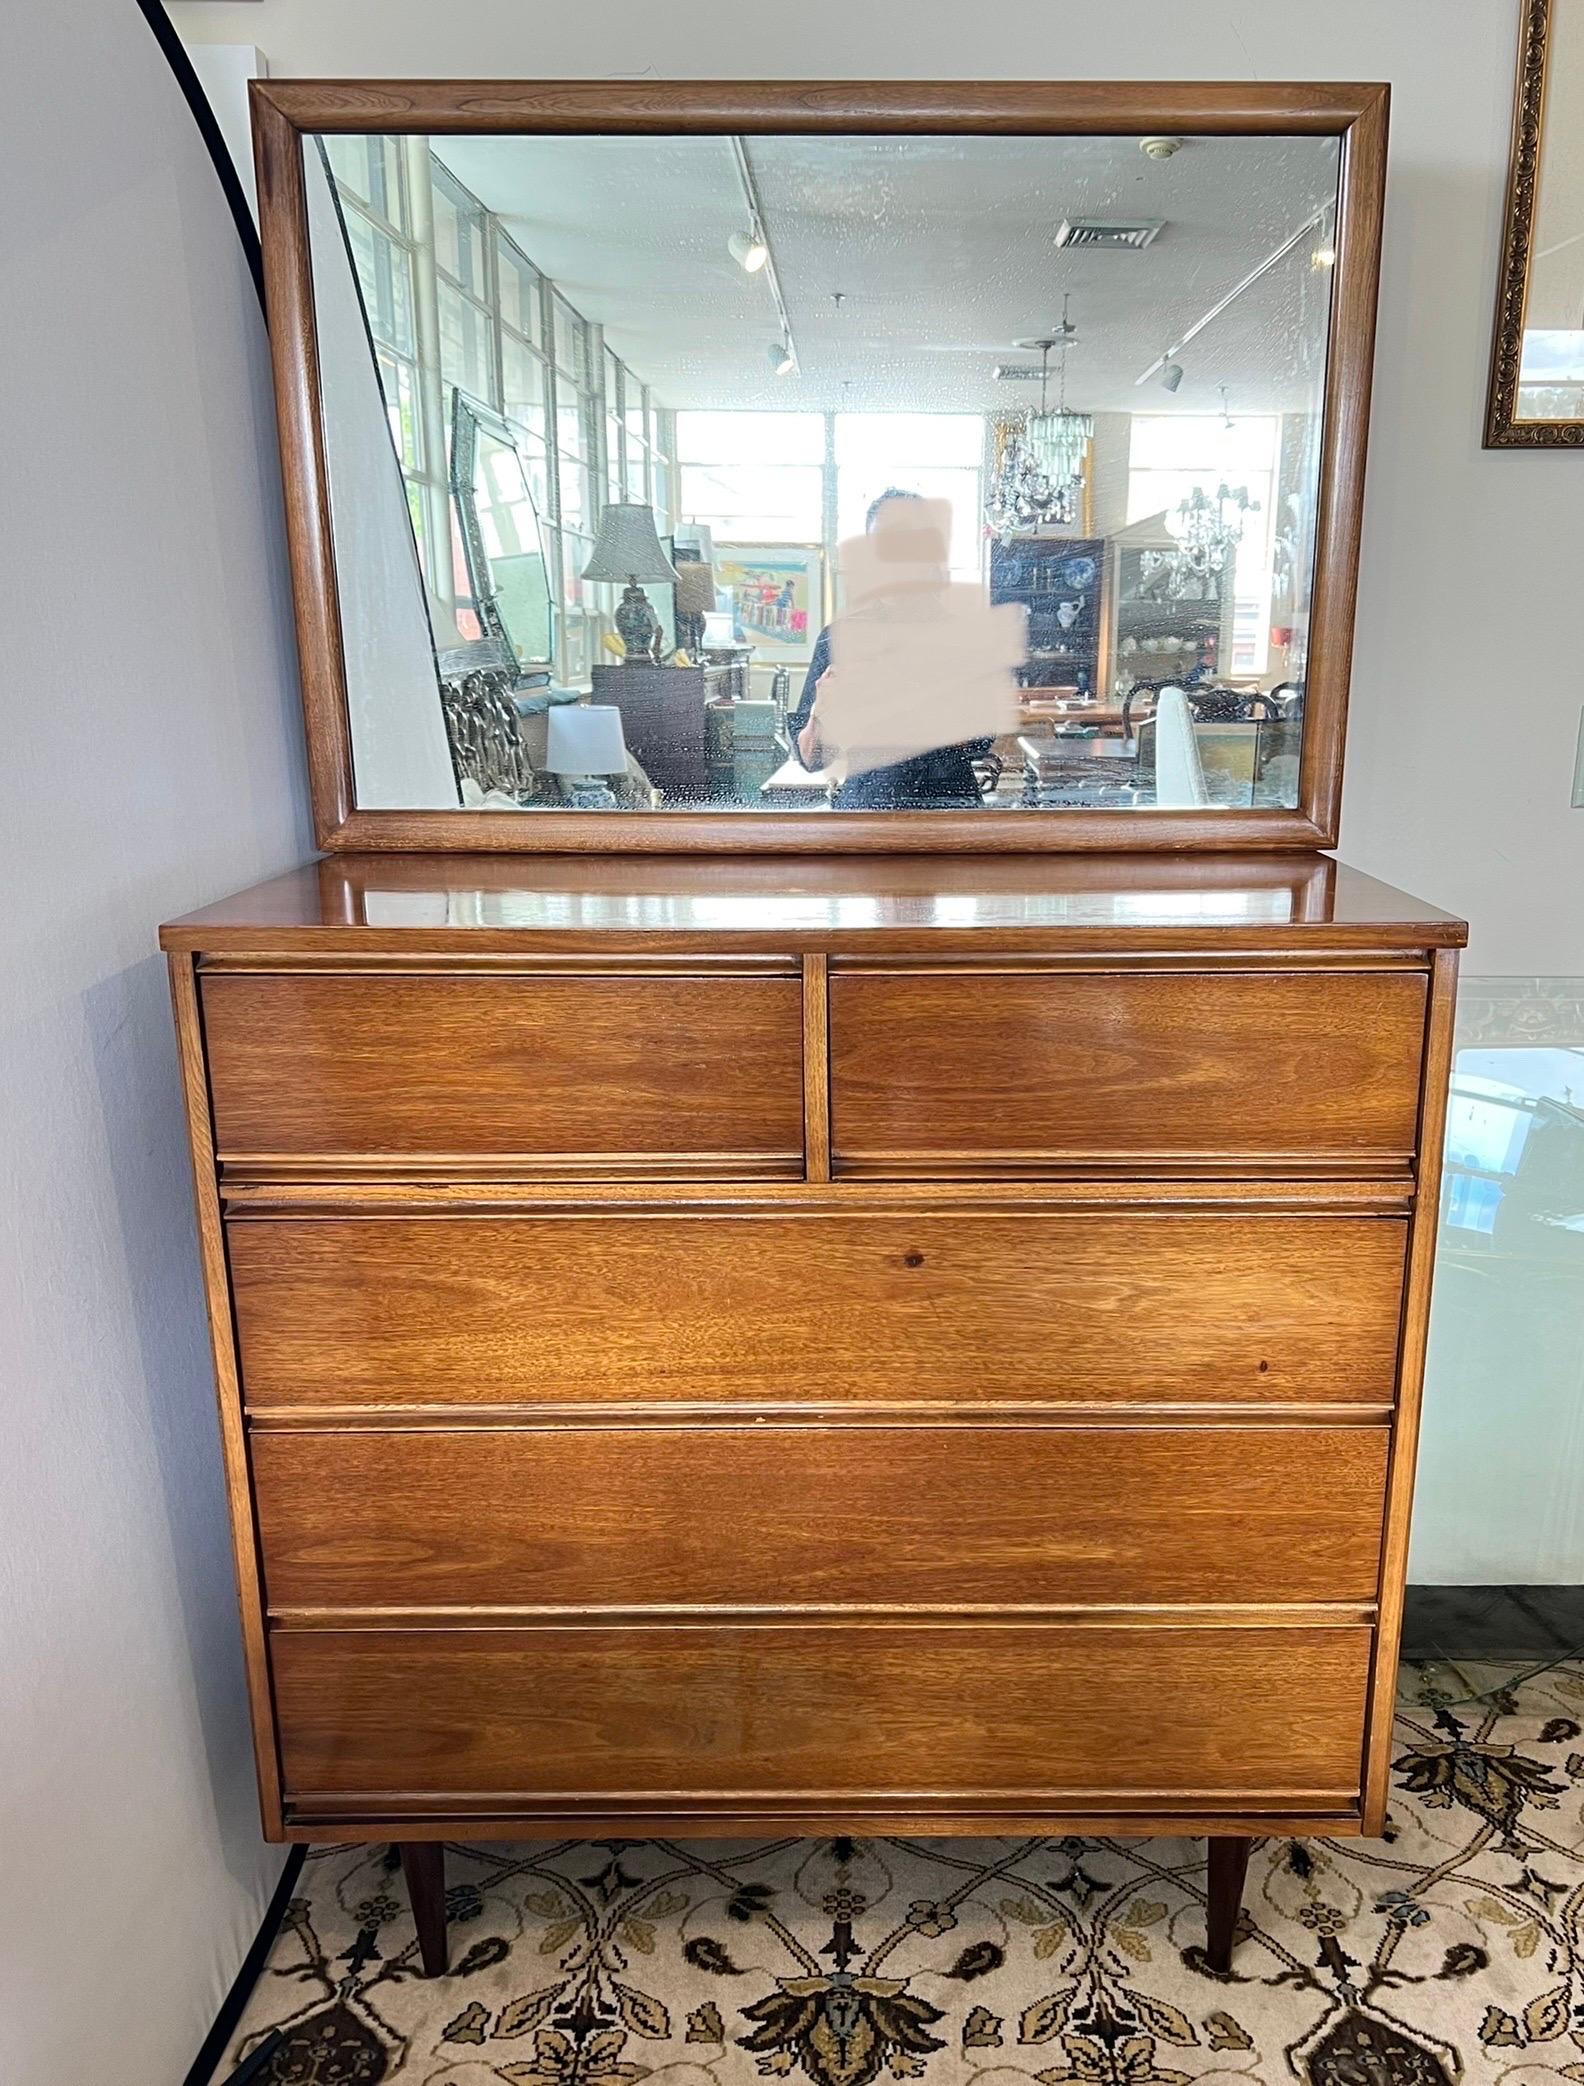 Mid century 2 pc walnut two over three drawer dresser with mirror. Clean sleek design by Dixie. The mirror dimensions are 42.5w by 28.5 tall and the dresser dimensions are above. Great scale and better lines. Why not own the good stuff.